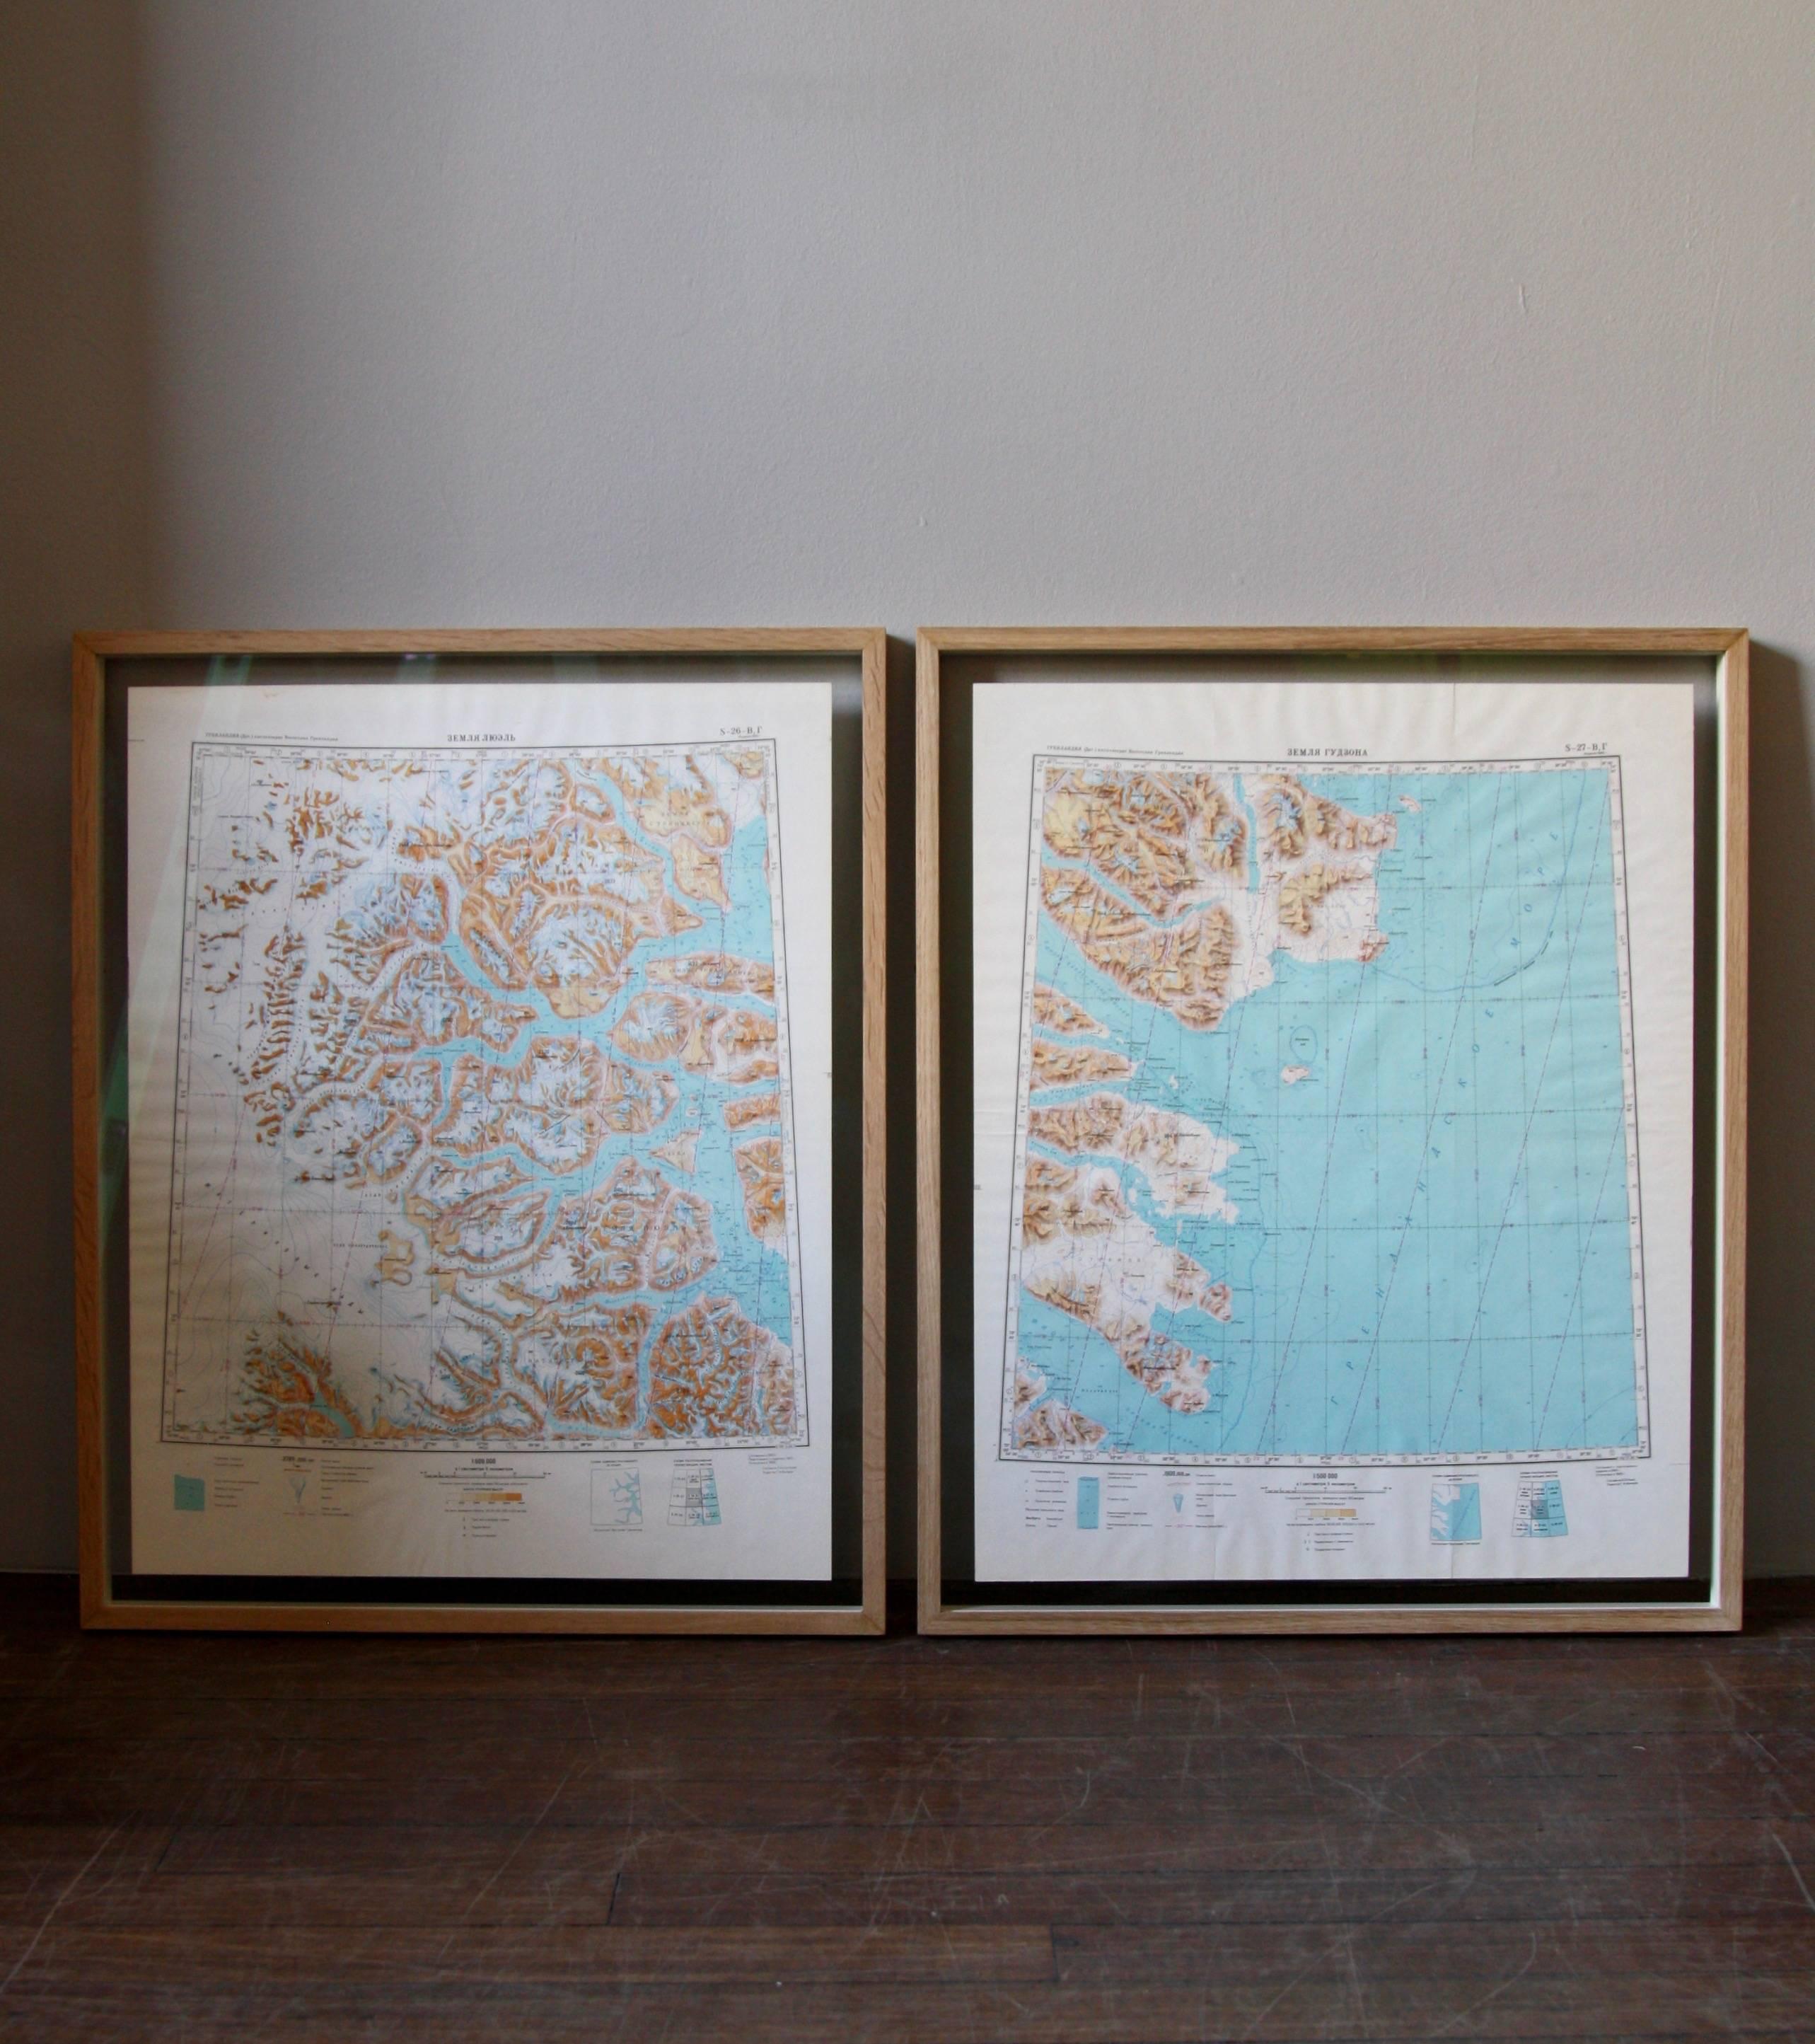 A pair of maps detailing an Eastern section of Greenland. The maps were drawn and produced by the USSR circa 1960. As well as illustrating the lay of the land, population densities are recorded too -down to the last igloo.

The colours of the maps